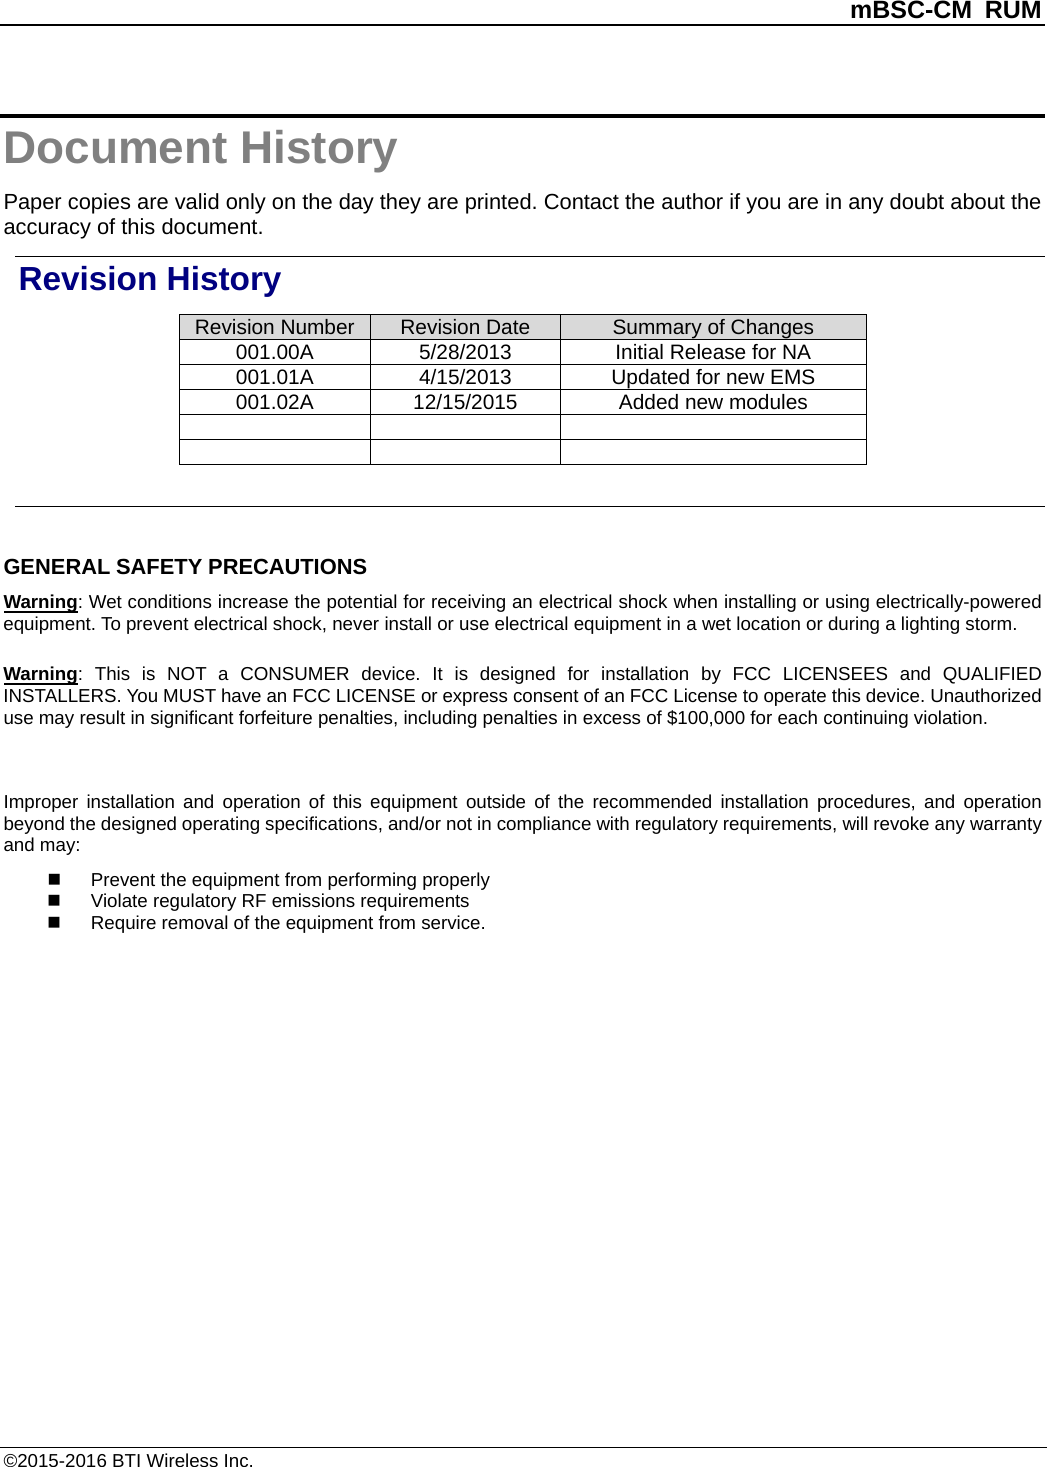          mBSC-CM RUM   ©2015-2016 BTI Wireless Inc. Document History Paper copies are valid only on the day they are printed. Contact the author if you are in any doubt about the accuracy of this document. Revision History Revision Number Revision Date Summary of Changes 001.00A 5/28/2013 Initial Release for NA   001.01A 4/15/2013 Updated for new EMS   001.02A 12/15/2015 Added new modules           GENERAL SAFETY PRECAUTIONS Warning: Wet conditions increase the potential for receiving an electrical shock when installing or using electrically-powered equipment. To prevent electrical shock, never install or use electrical equipment in a wet location or during a lighting storm. Warning:  This is NOT a CONSUMER device. It is designed for installation by FCC LICENSEES and QUALIFIED INSTALLERS. You MUST have an FCC LICENSE or express consent of an FCC License to operate this device. Unauthorized use may result in significant forfeiture penalties, including penalties in excess of $100,000 for each continuing violation.  Improper installation and operation of this equipment  outside of the recommended installation procedures, and operation beyond the designed operating specifications, and/or not in compliance with regulatory requirements, will revoke any warranty and may:  Prevent the equipment from performing properly  Violate regulatory RF emissions requirements  Require removal of the equipment from service.  